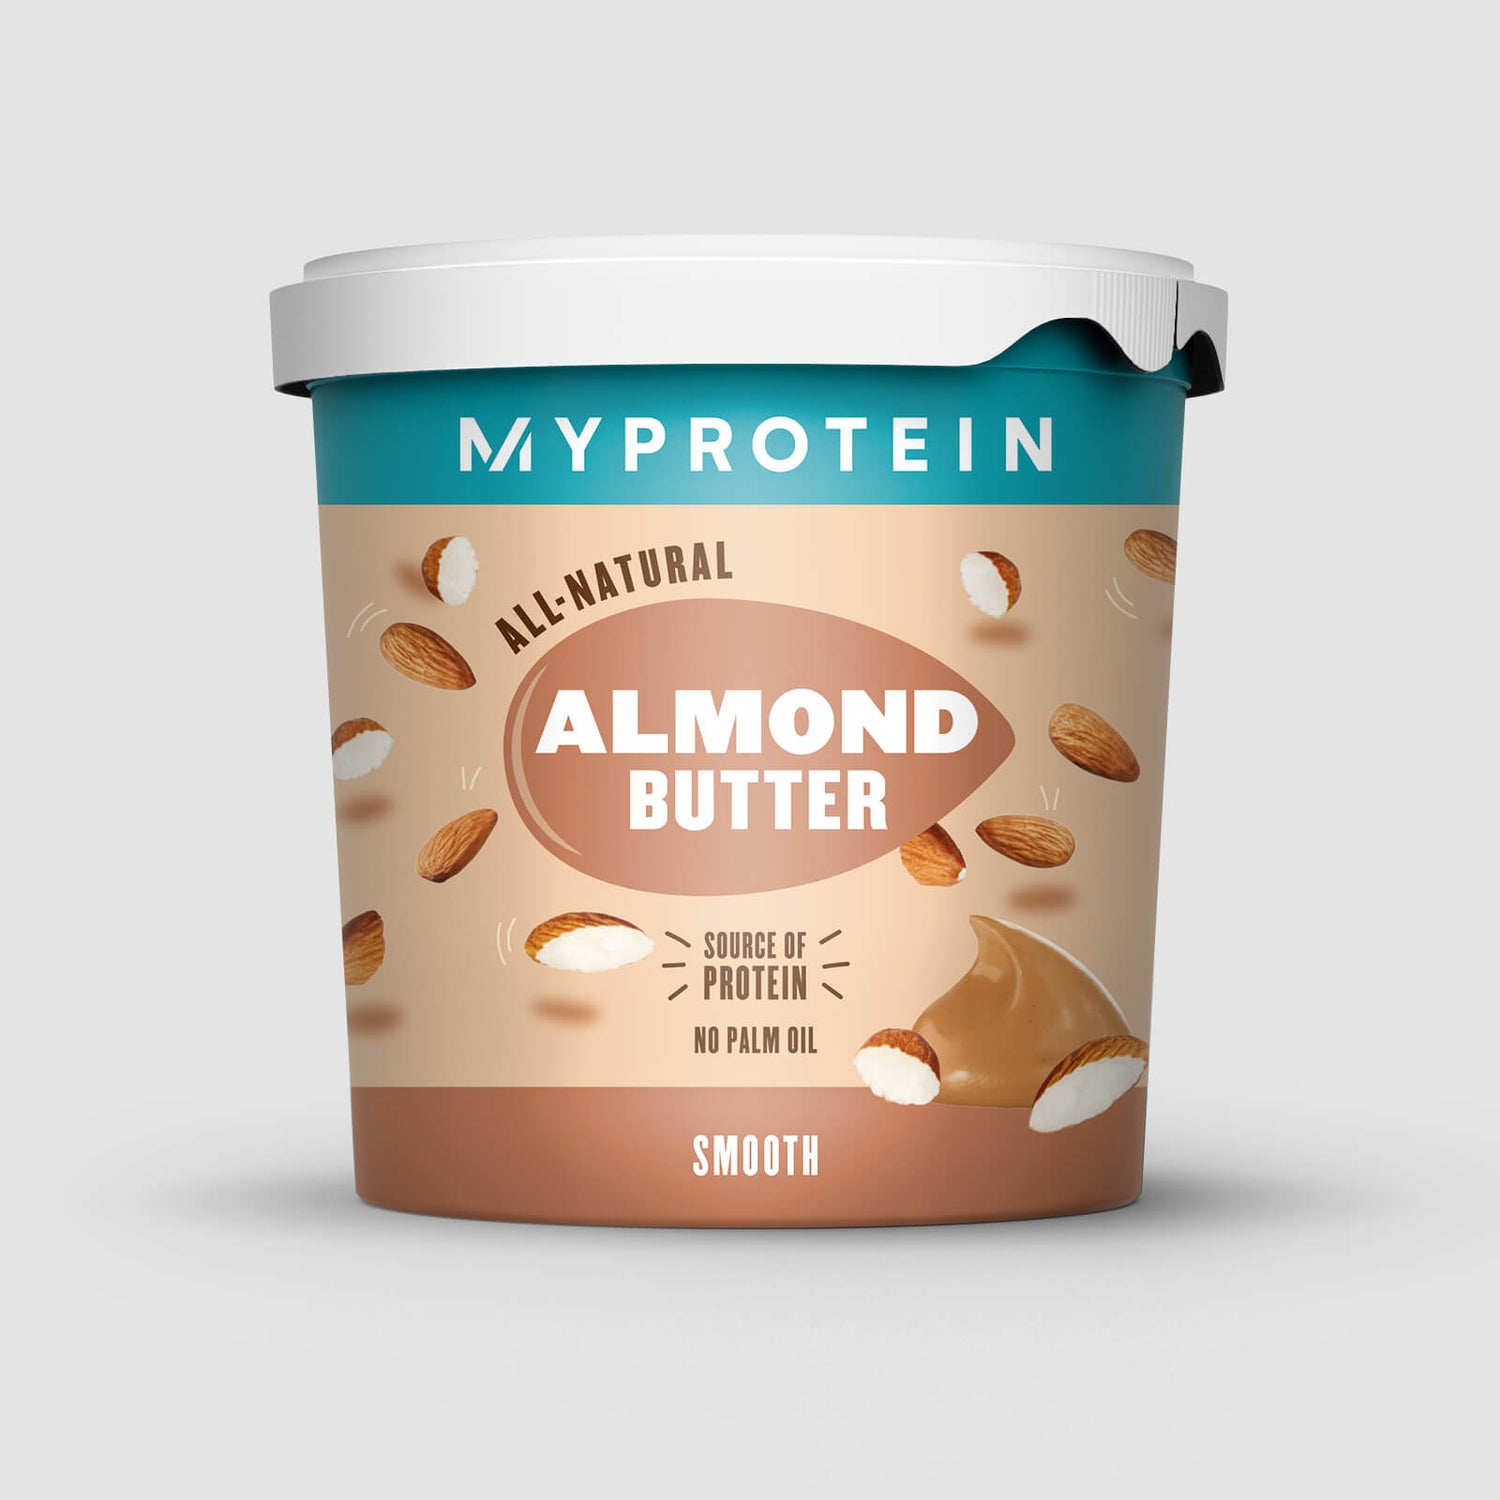 All-Natural Almond Butter - Smooth